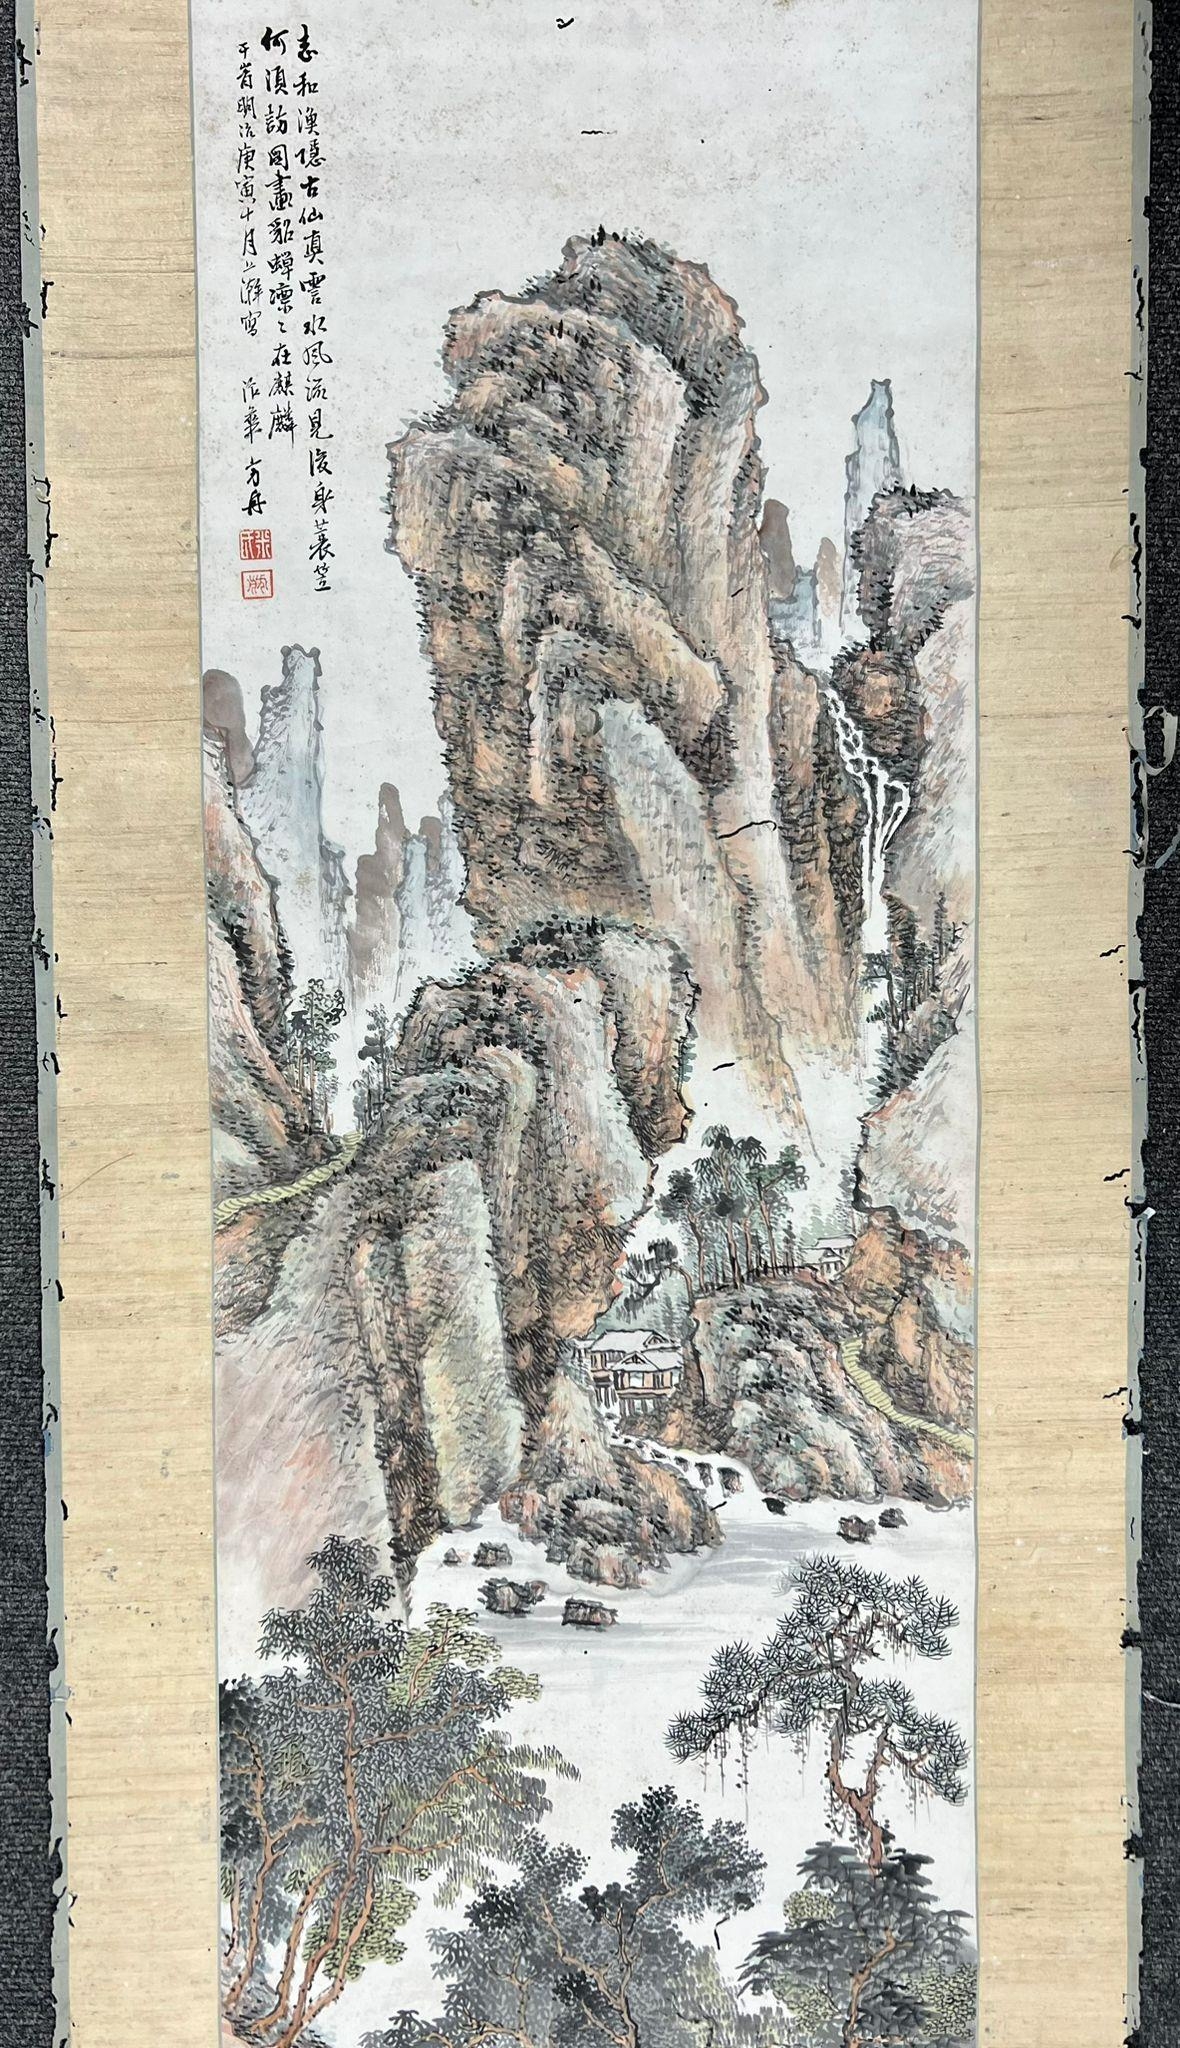 A CHINESE PAINTING ON SILK SCROLL FROM THE TANG DYNASTY, DEPICTING A MOUNTAIN PASS NEAR THE ARTIST'S - Image 3 of 3